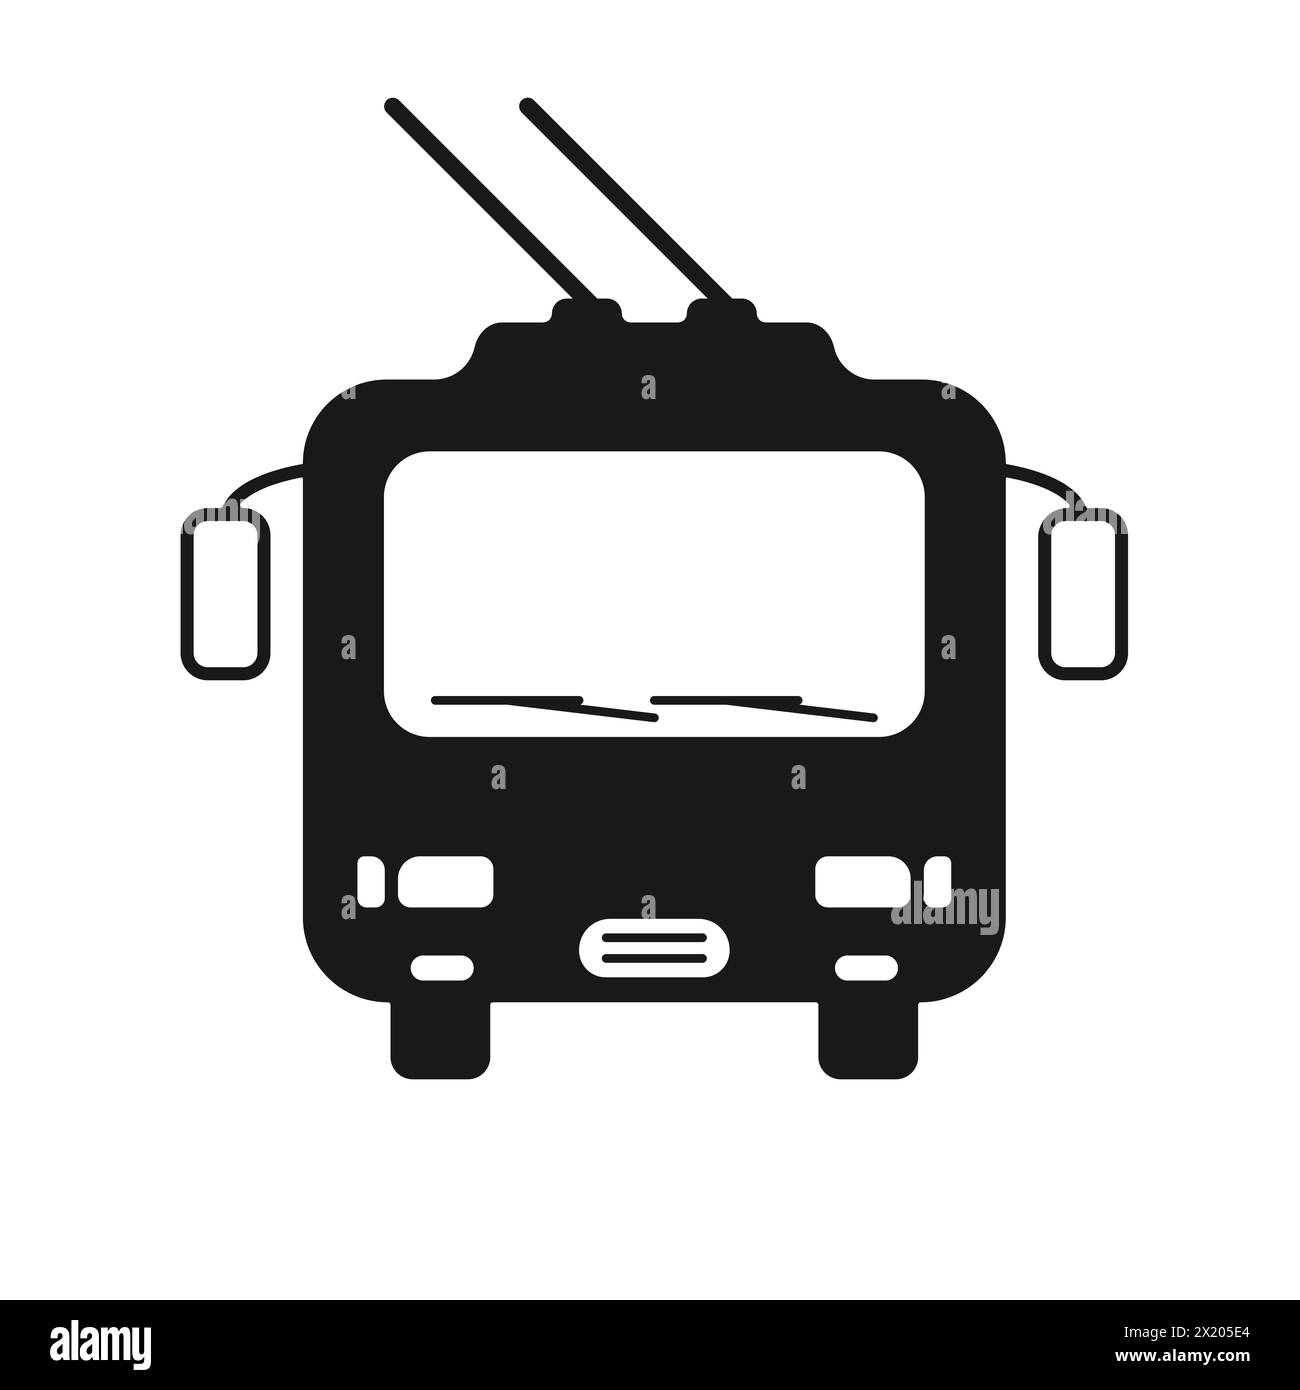 Cable city bus. Silhouette of a trolleybus from the front vector icon. Public transport for passengers vector. City transport trolleybus black icon. Stock Vector